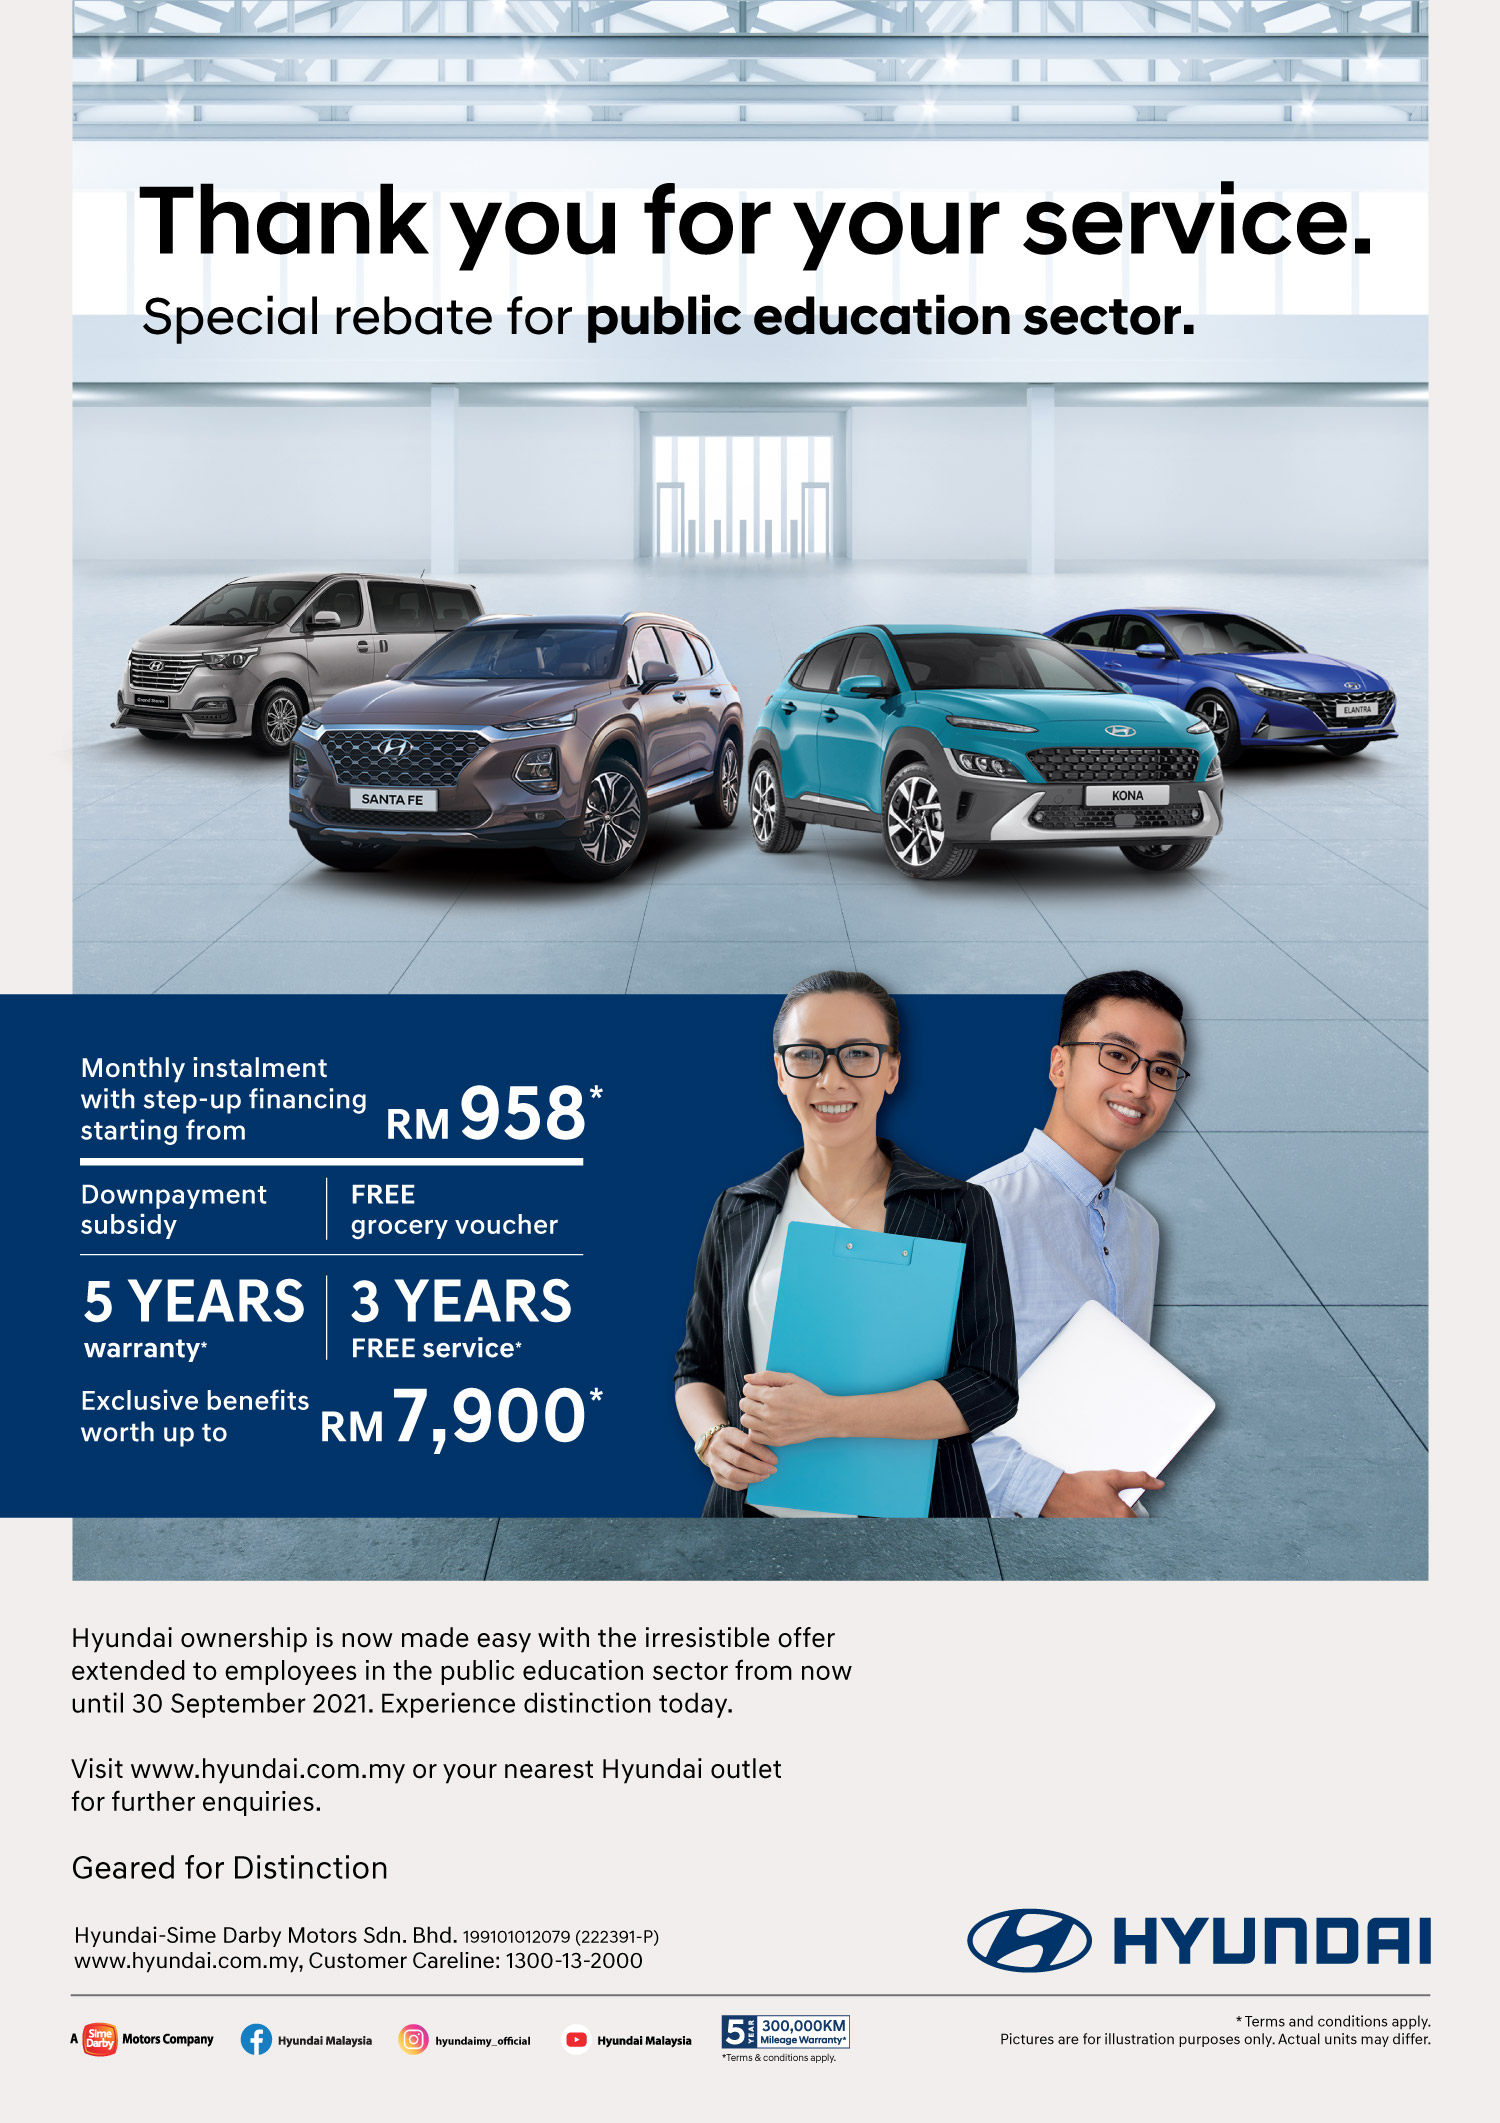 Thank you for your service. Special Rebate for Public Education Sector. Monthly instalment with step-up financing starting from RM958* | Downpayment subsidy 5 years warranty* | Free Grocery voucher 3 years free services* | Hyundai ownership is now made easy with the irresistible offer extended to employees in the government healthcare sector from now until 30 September 2021. Experience distinction today. Visit www.hyundai.com.my or your nearest Hyundai outlet for further enquiries. Exclusive benefits worth up to RM7,900* Terms and Conditions apply.